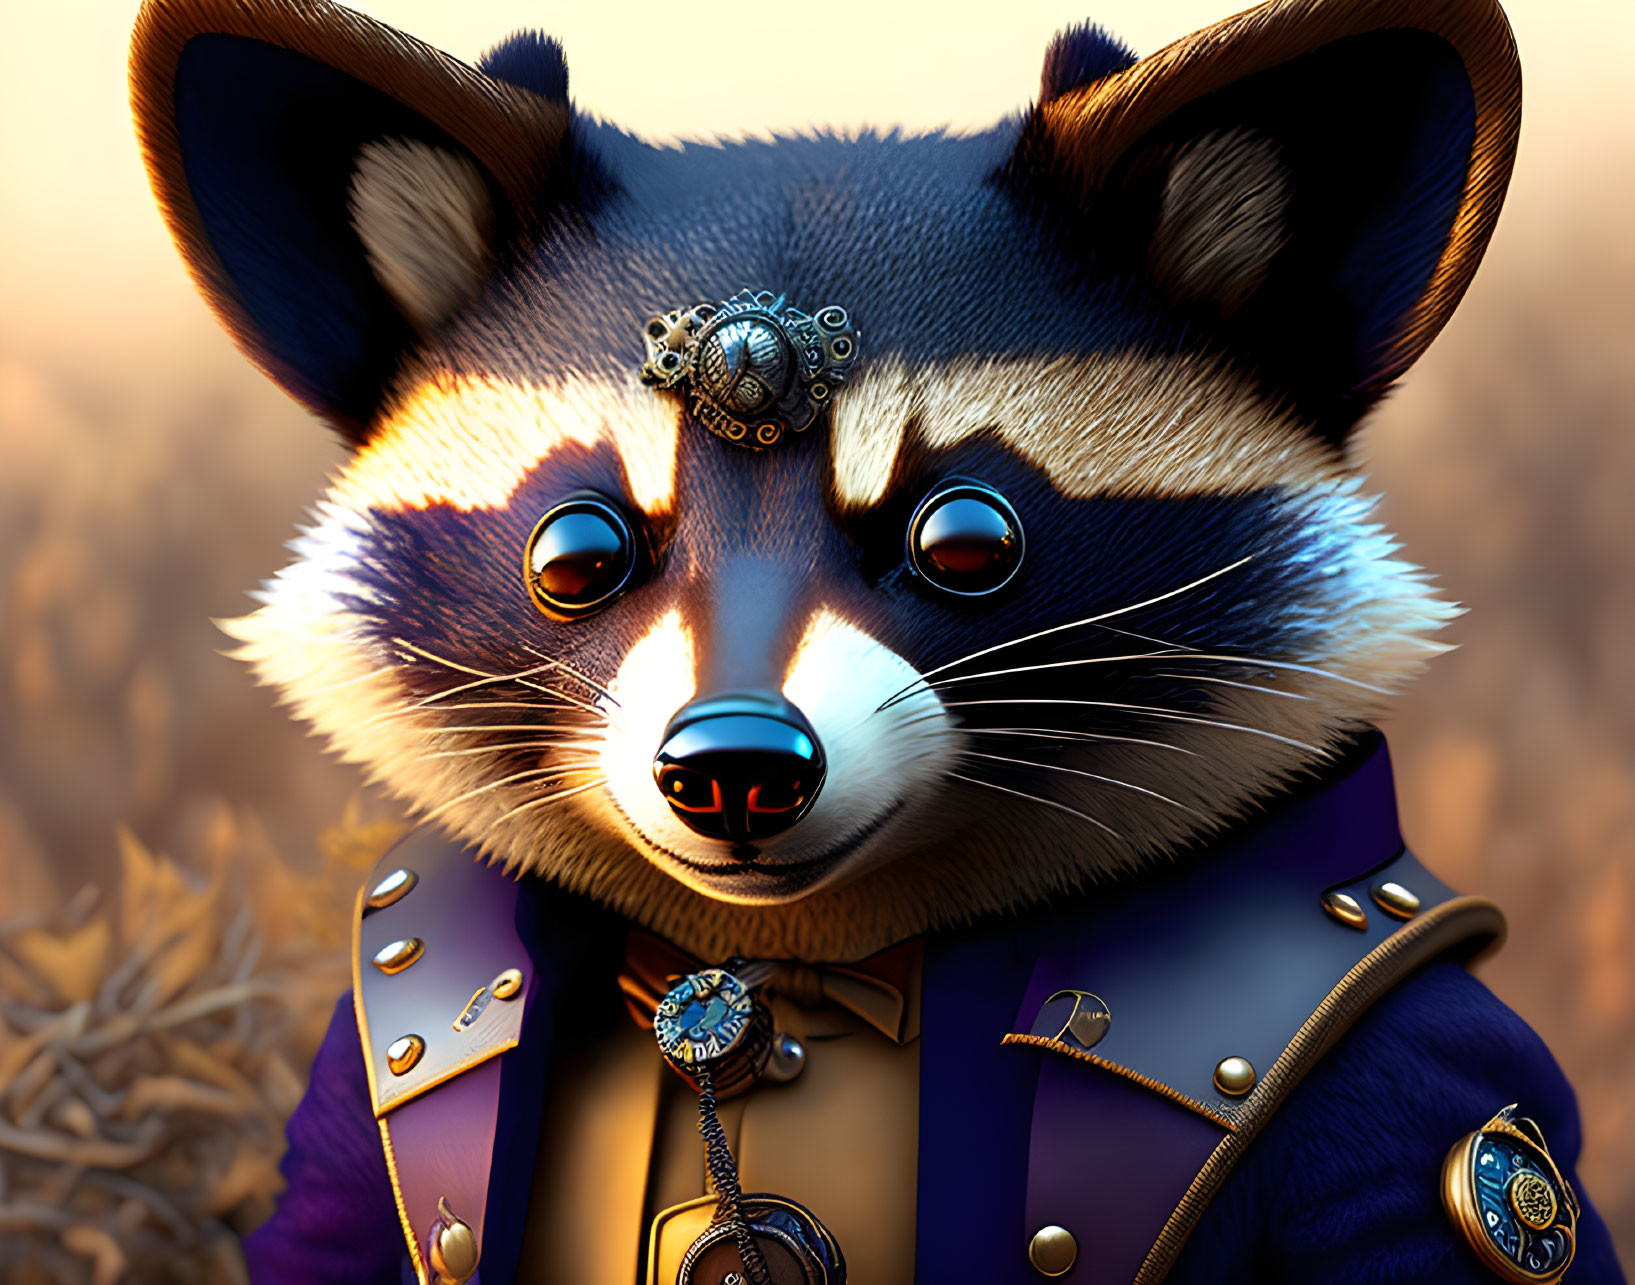 Detailed Steampunk-Inspired Raccoon Illustration with Monocle and Blue Jacket